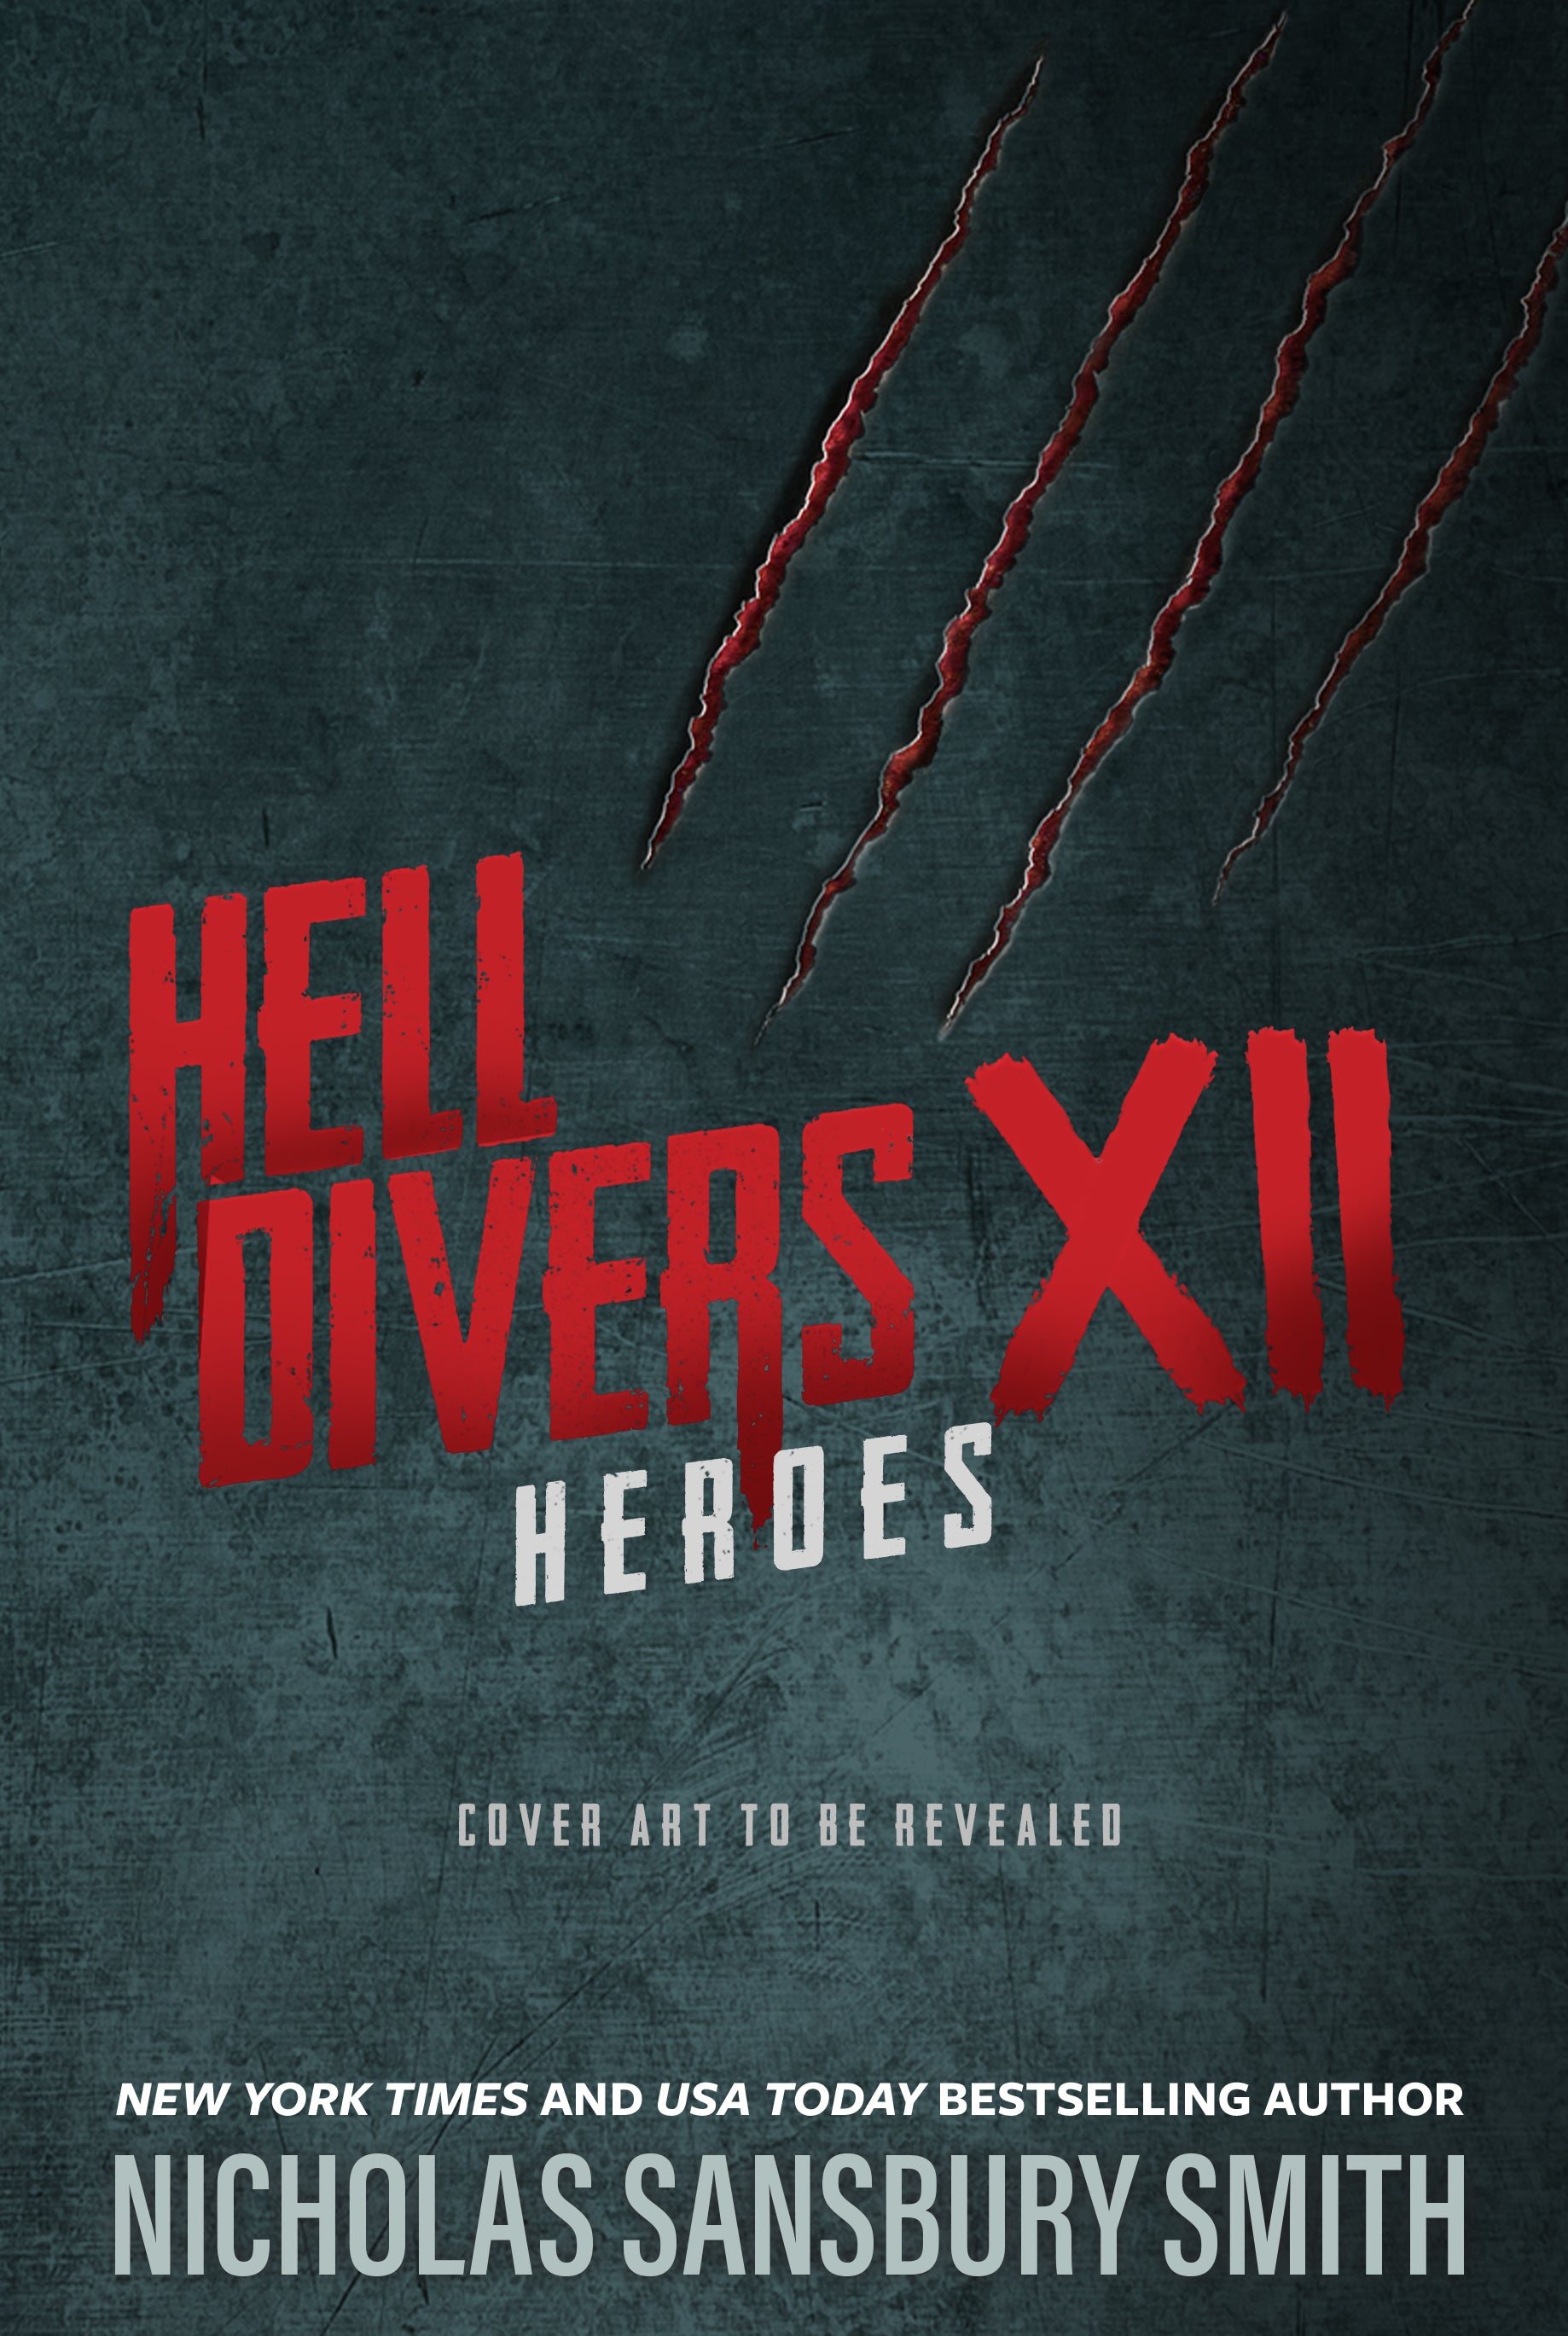 Hell Divers XII: Heroes